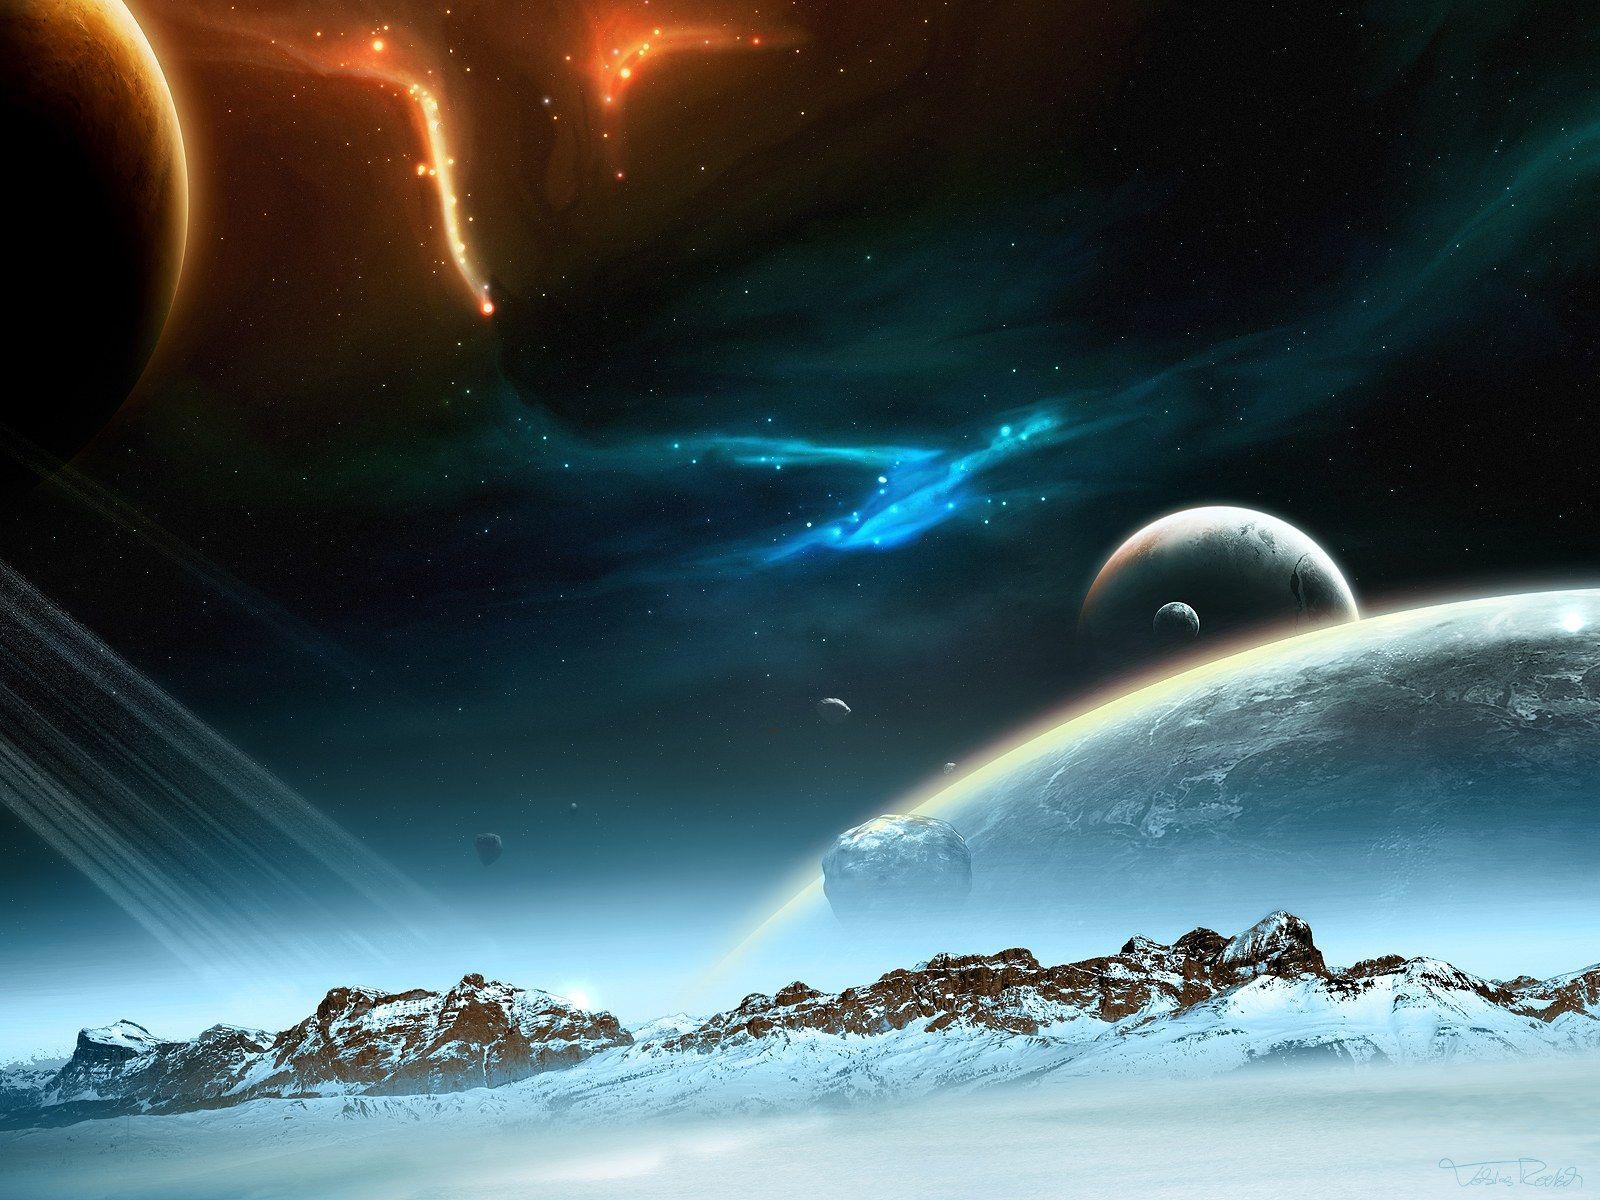 HD universe and planets digital art wallpaper. High Quality PC